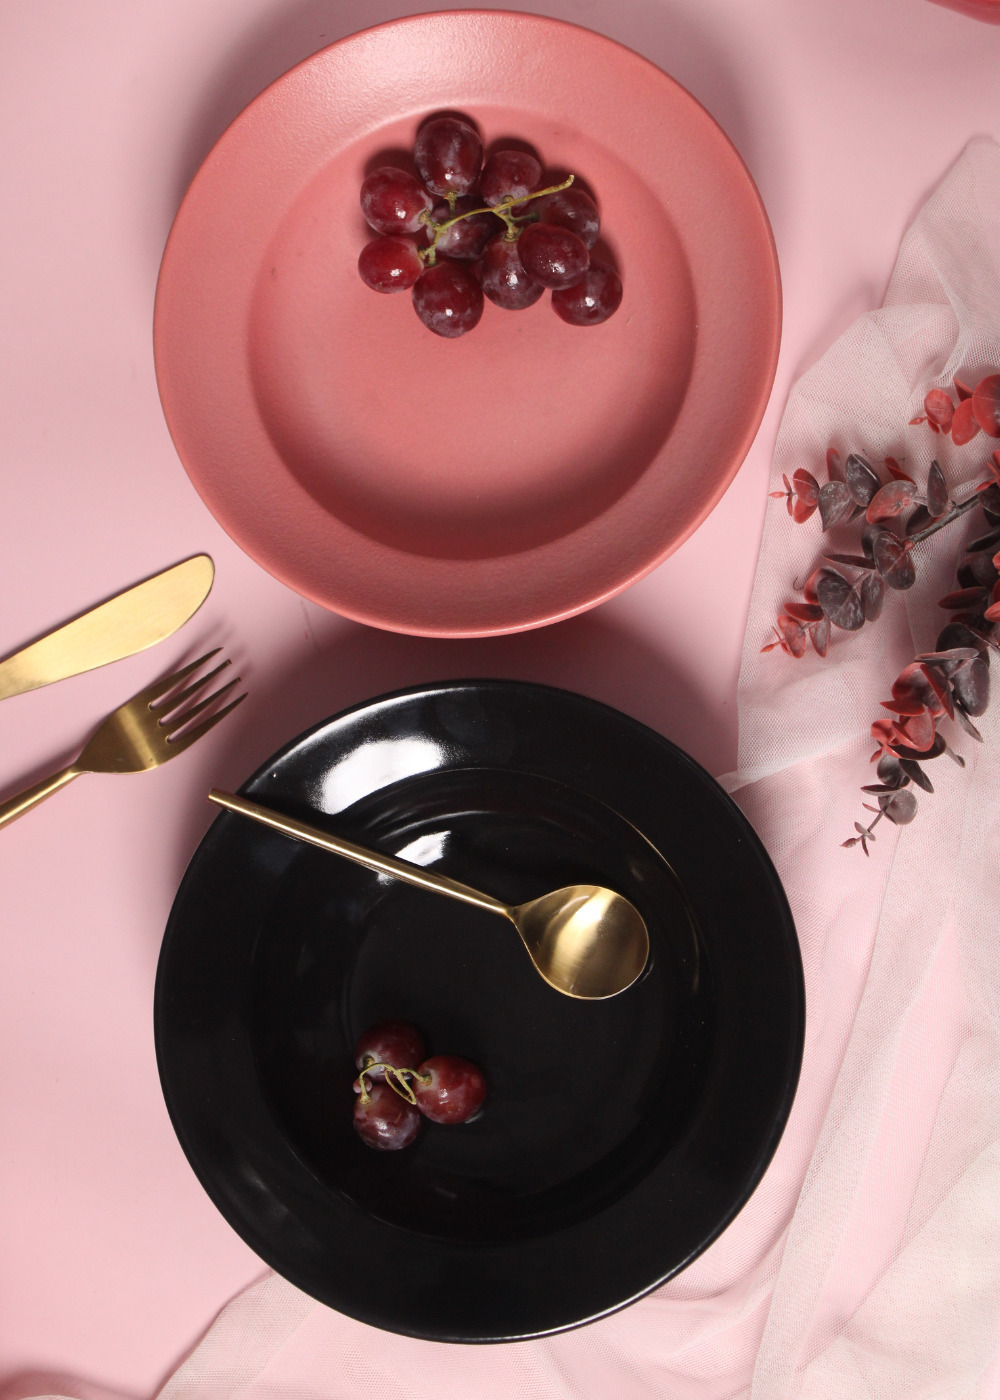 handmade pink & black pasta plate with golden cutlery